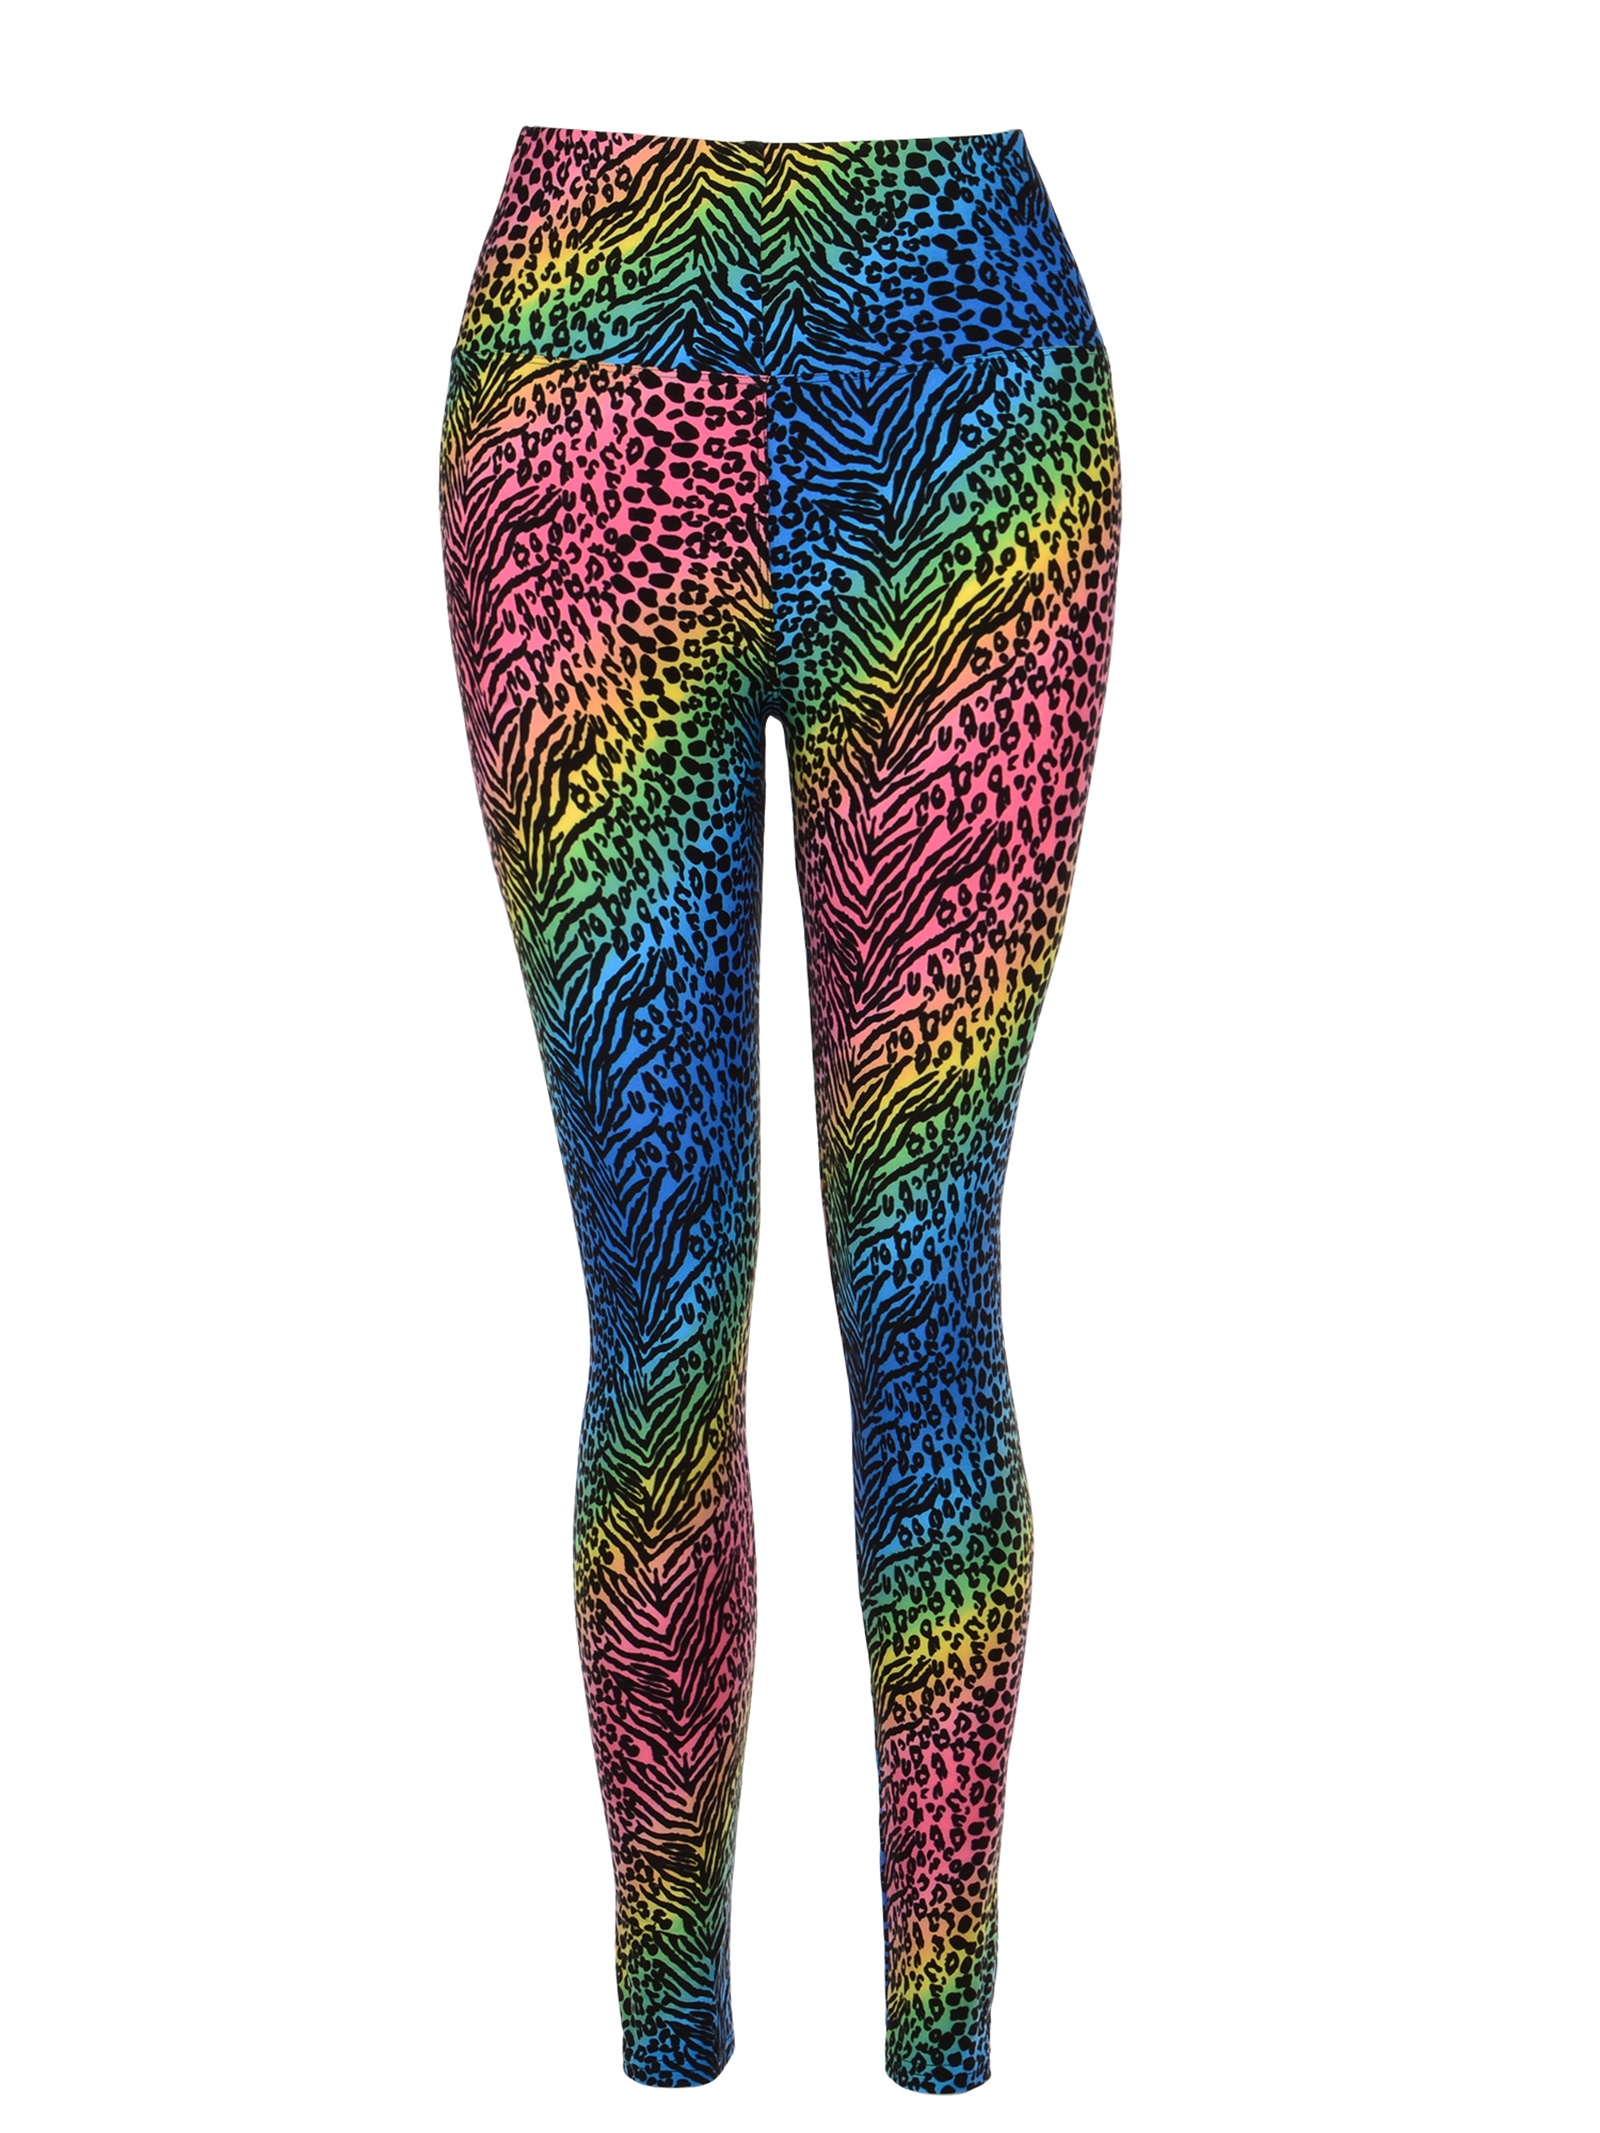 Satinior Soft Printed Leggings 80s Style Neon Leggings Pants With